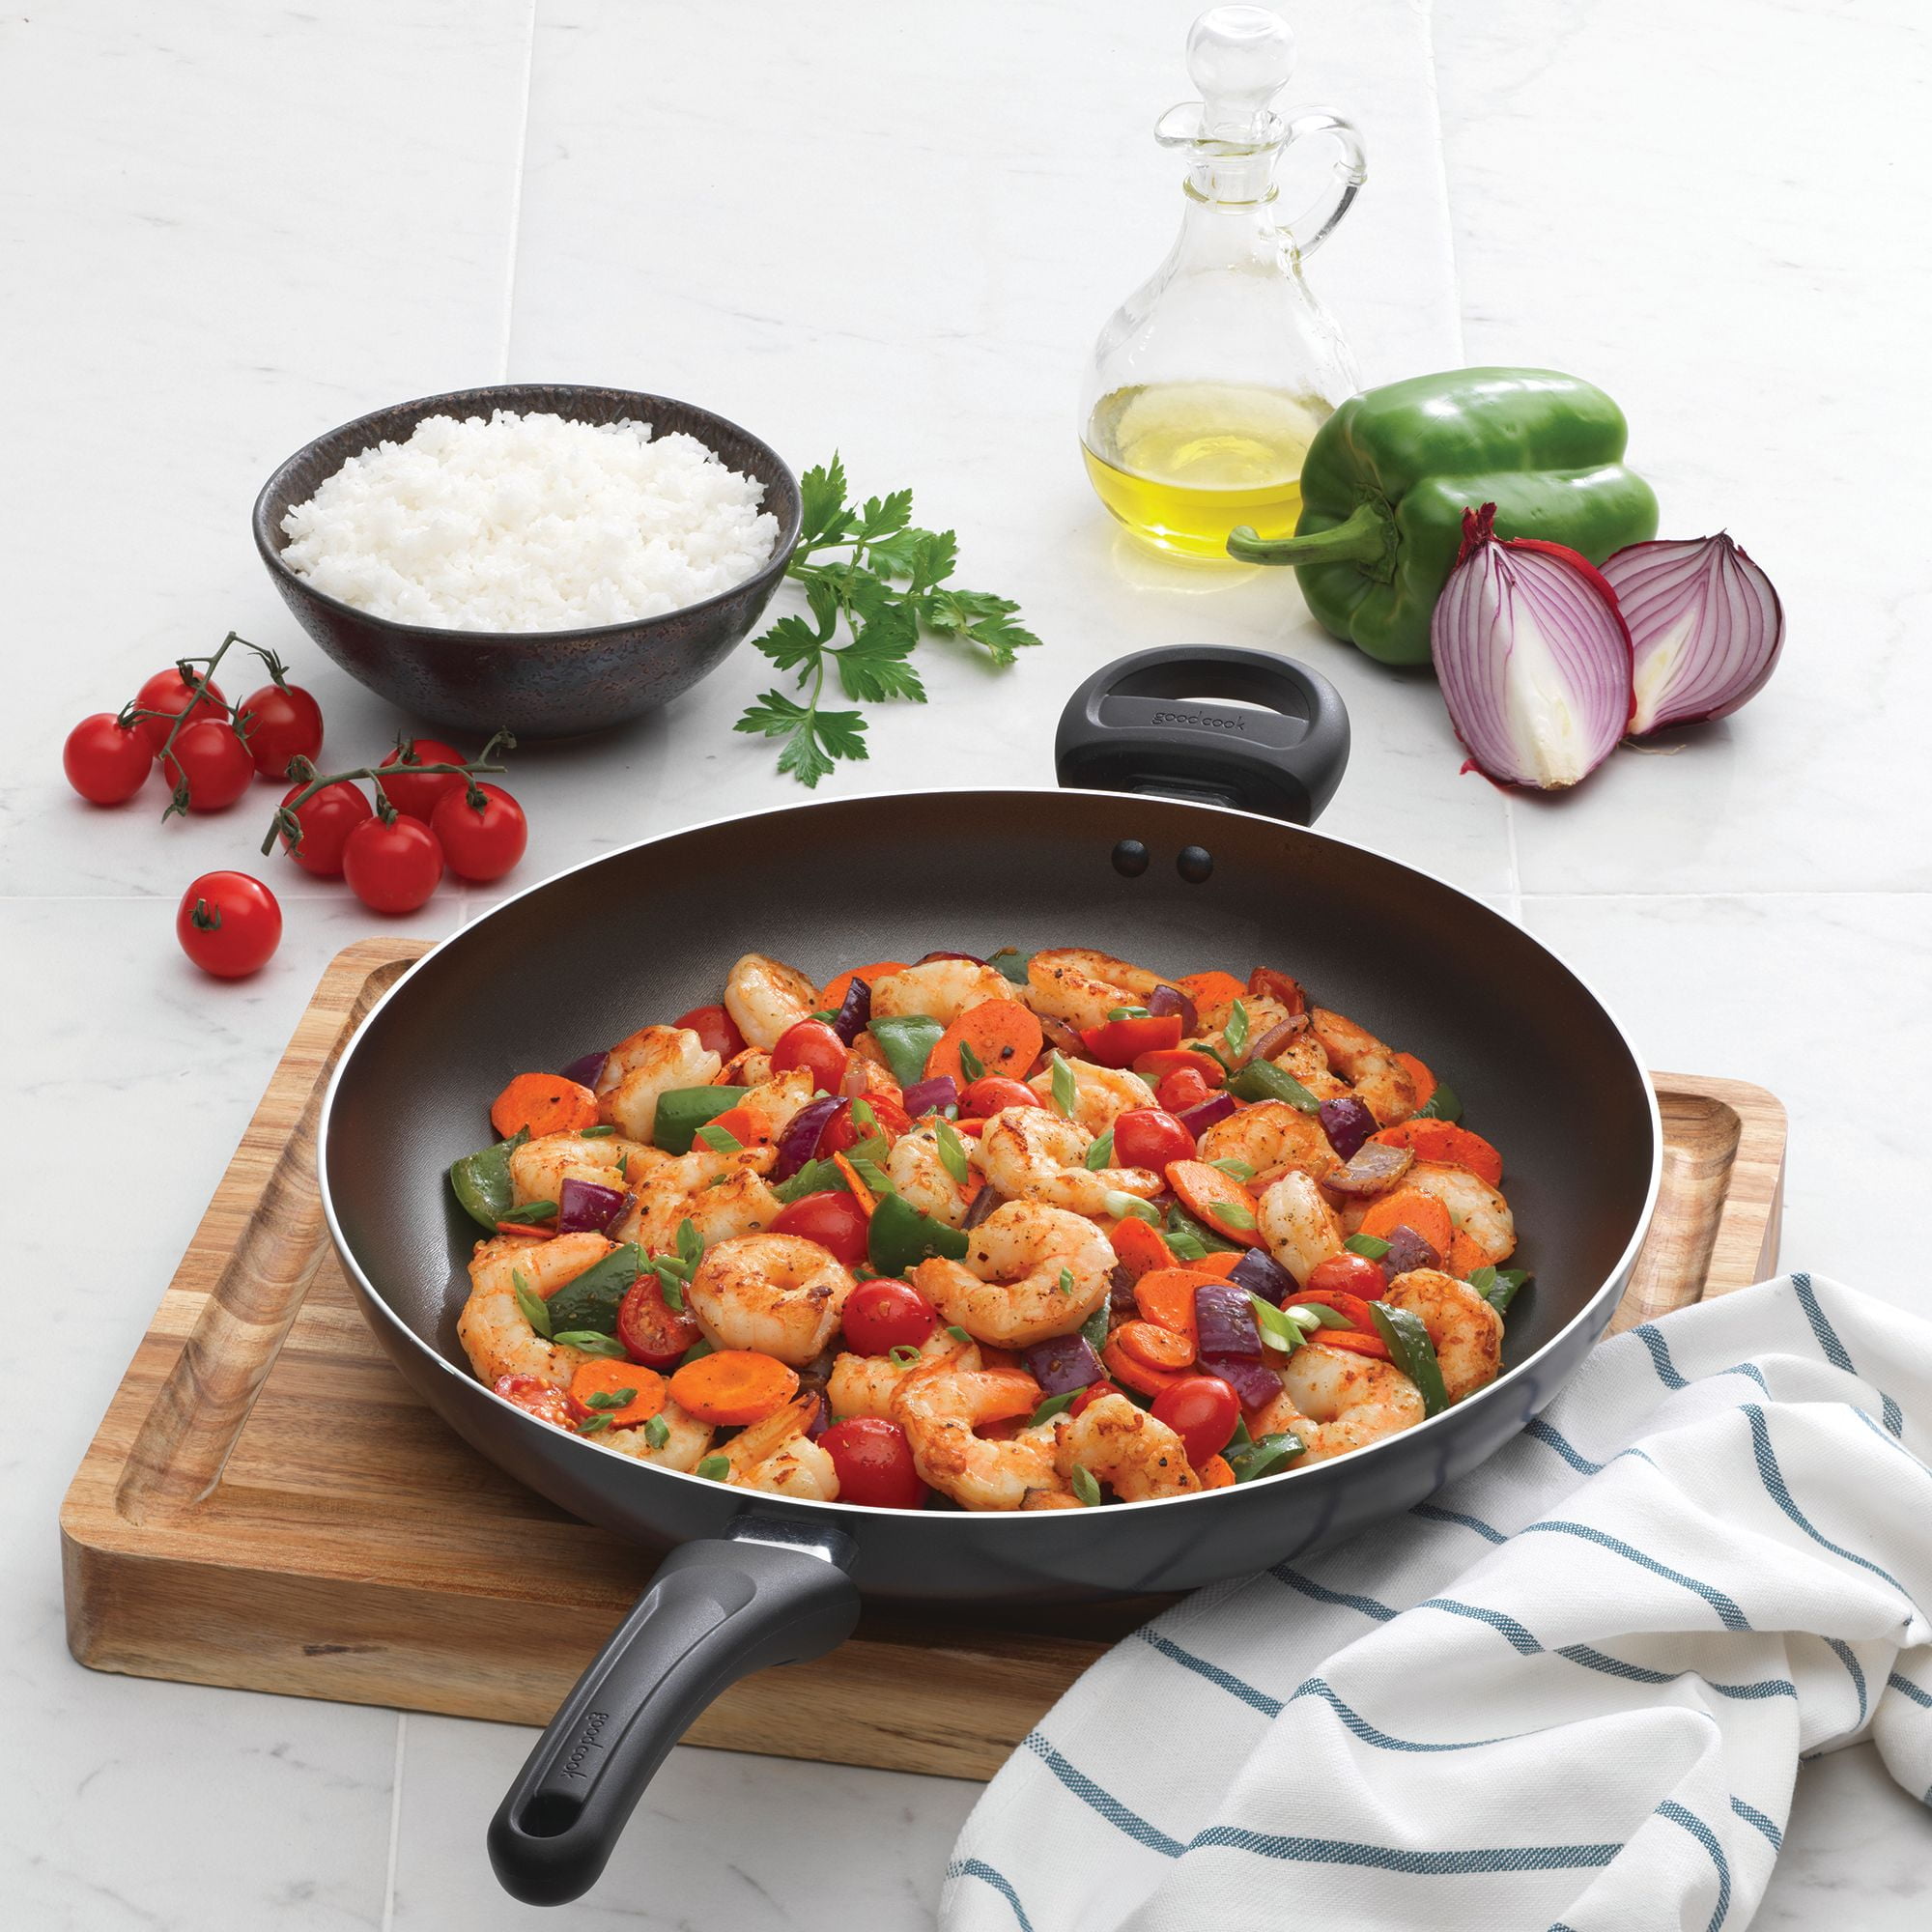 Goodcook, 13.5 inch Everyday Nonstick Fry Pan, Whole meal in one Pan 